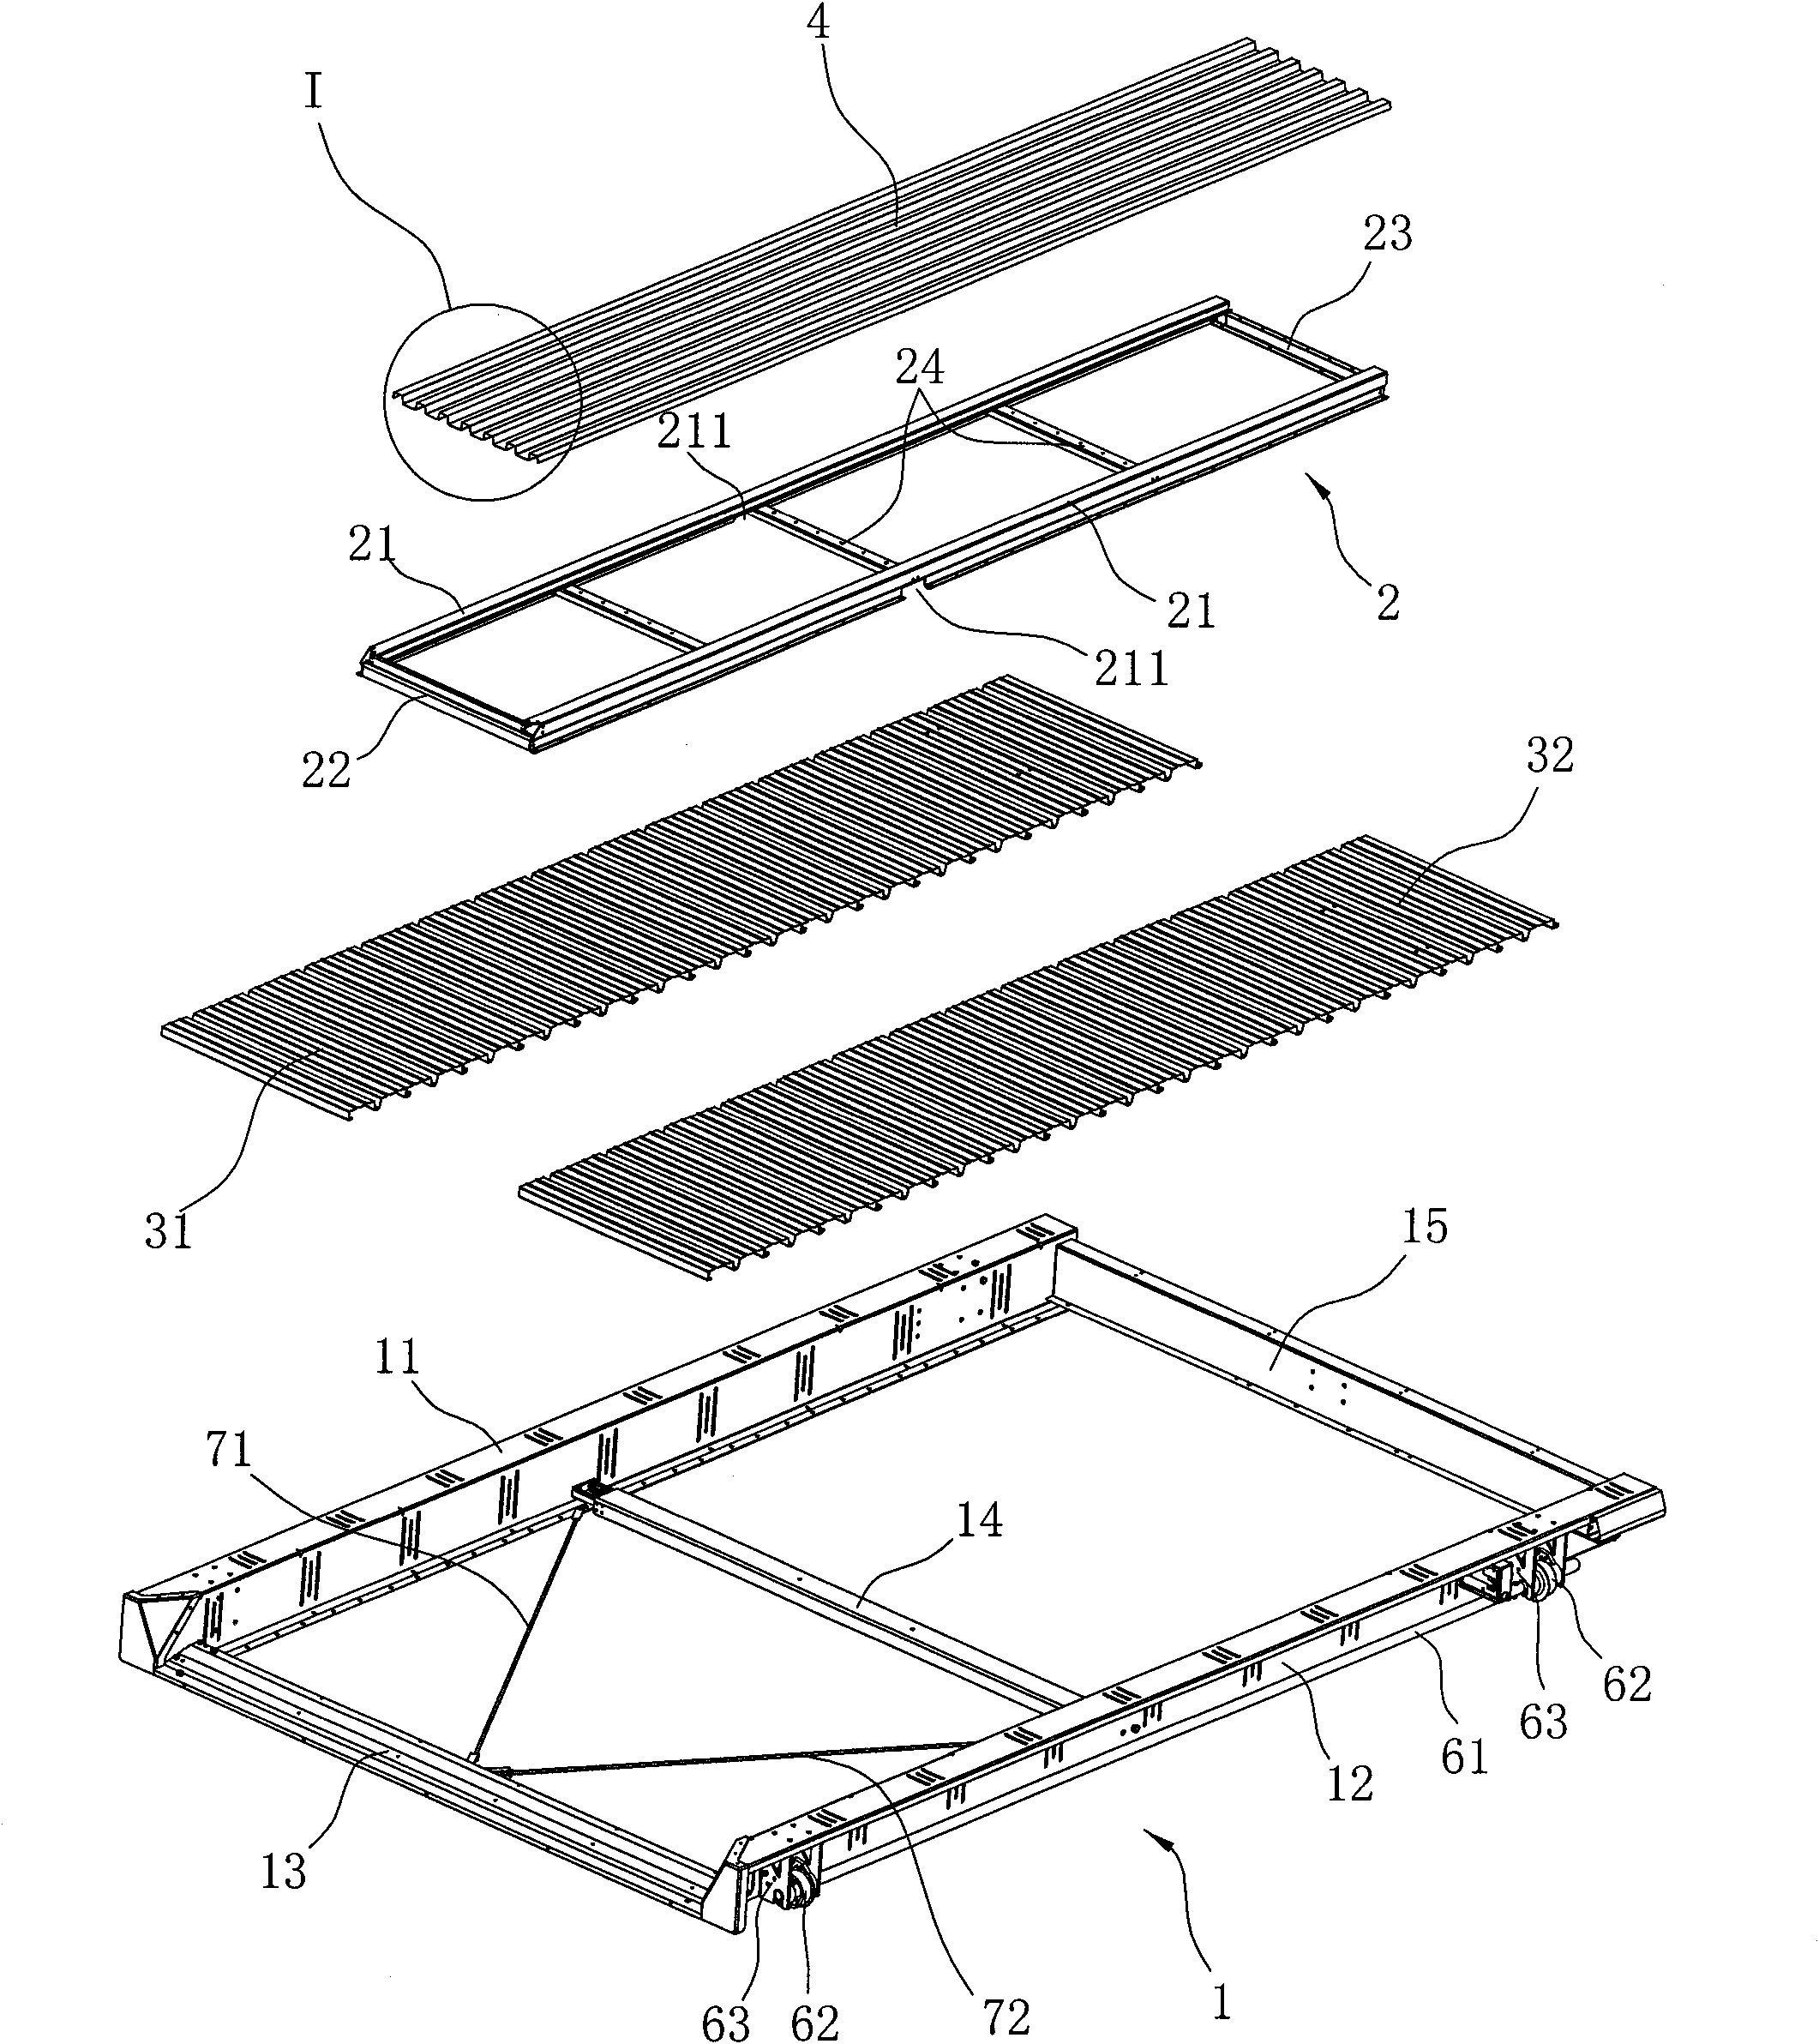 Vehicle-carrying tray